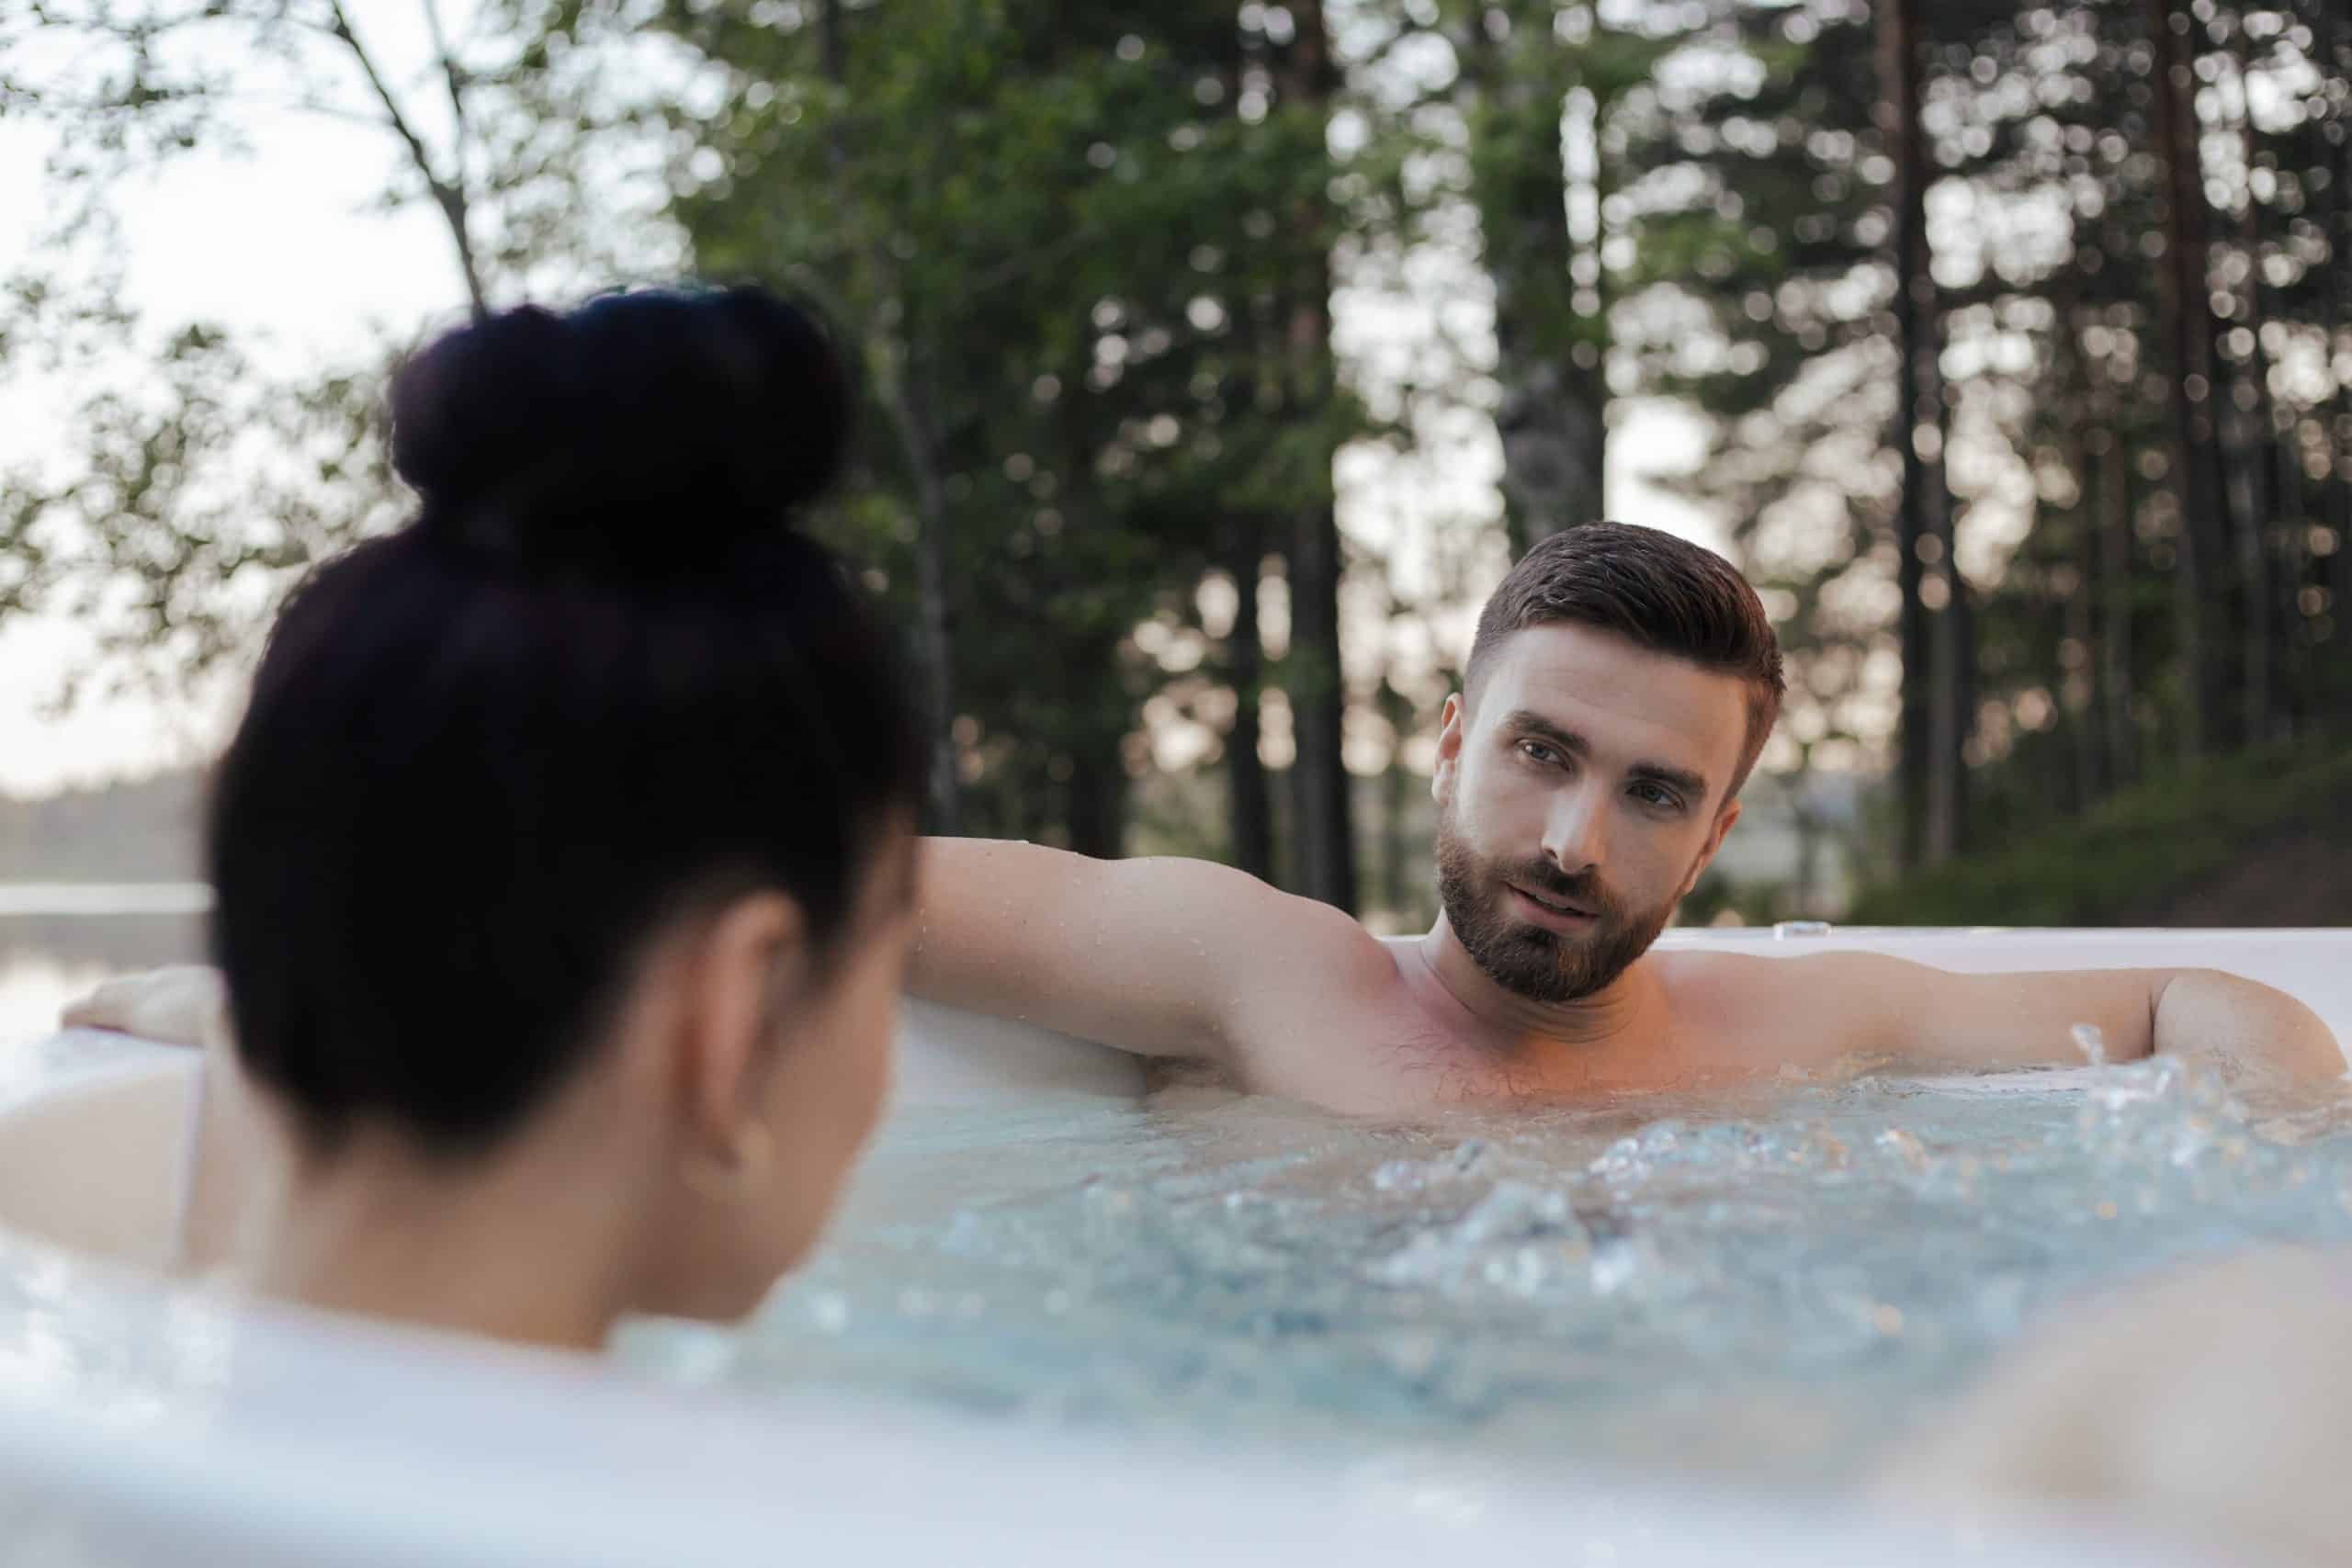 A couple sat in a hot tub